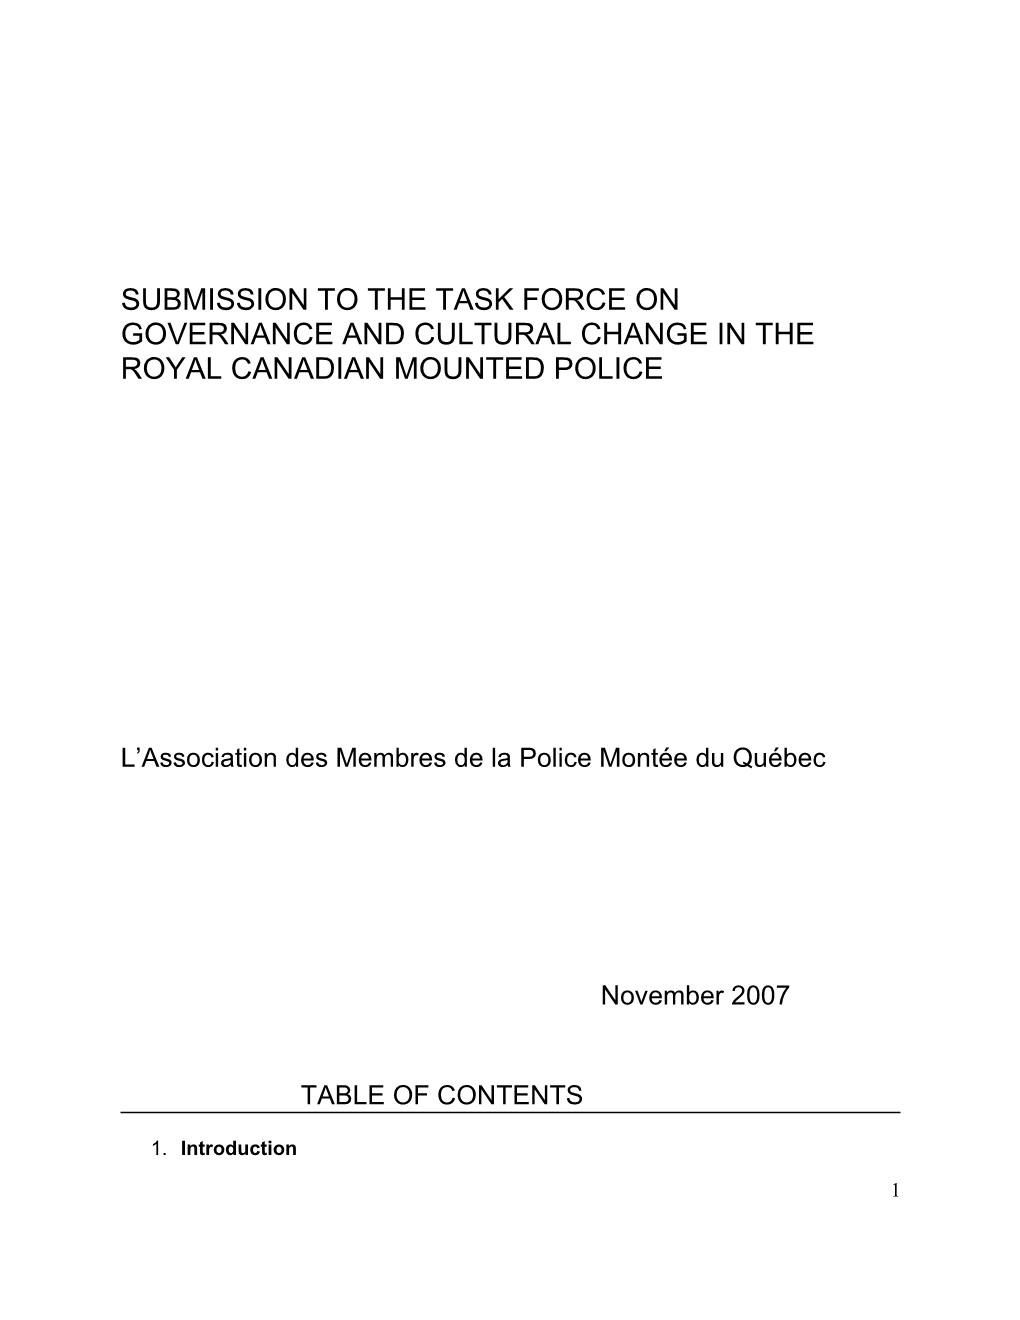 Submission To The Task Force On Governance And Cultural Change In The Royal Canadian Mounted Police